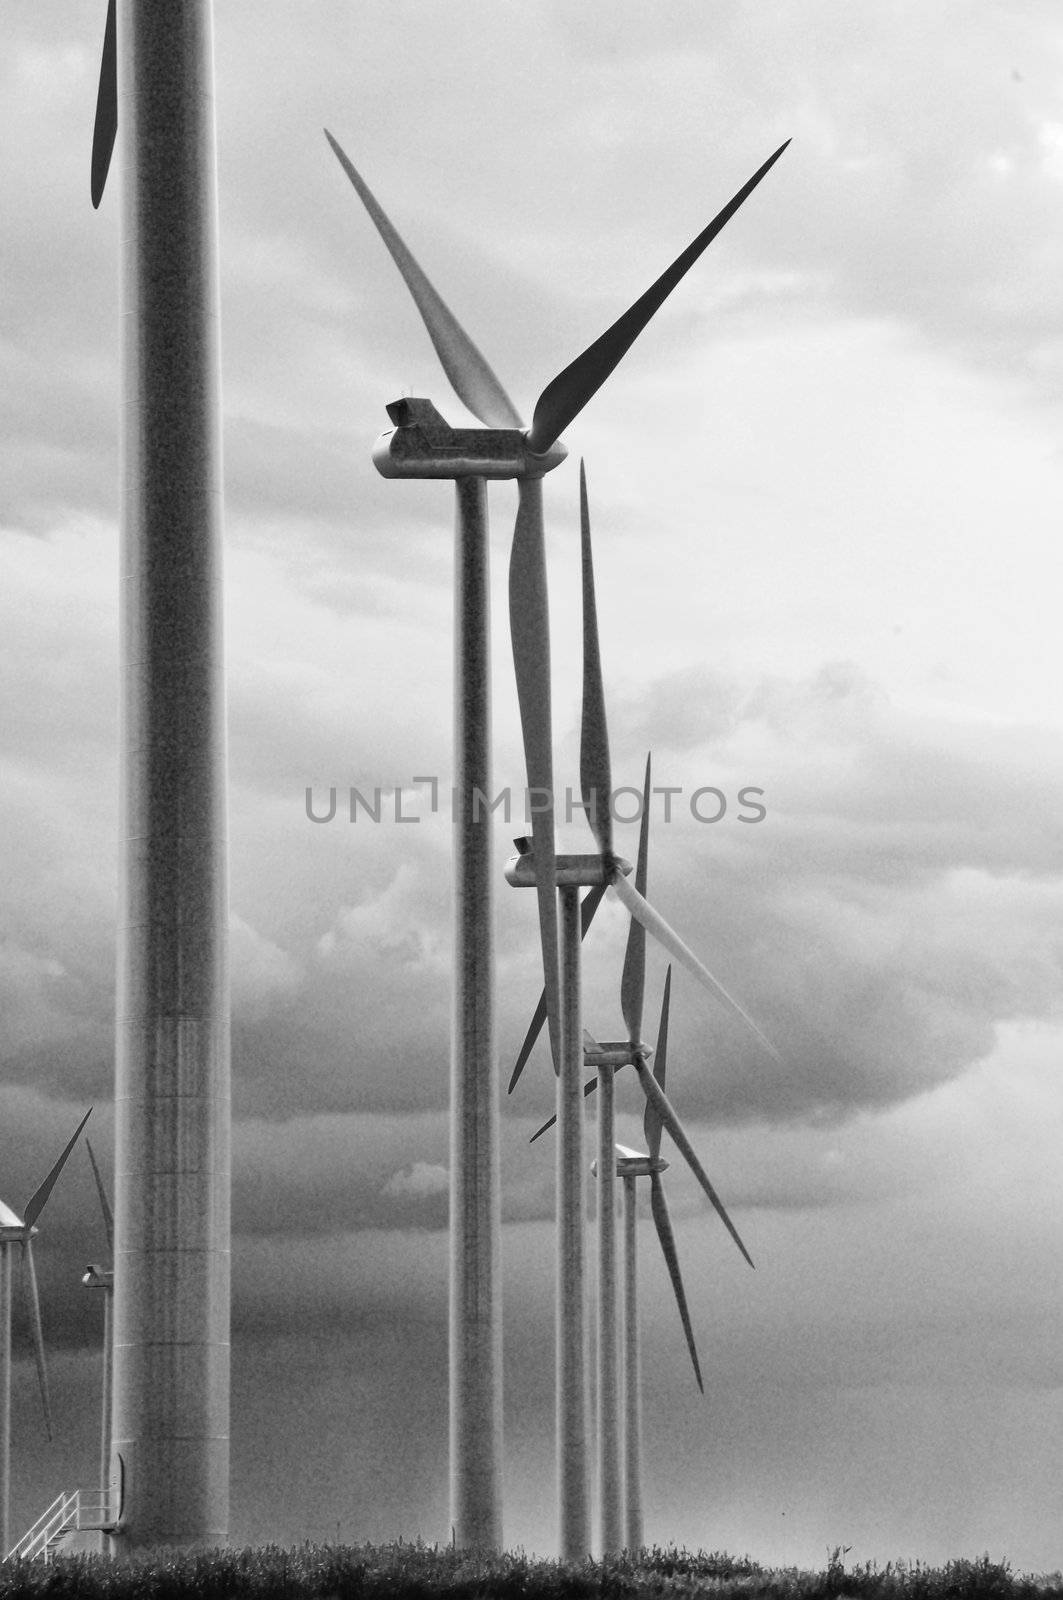 Row of wind turbines drying off after a rainstorm.